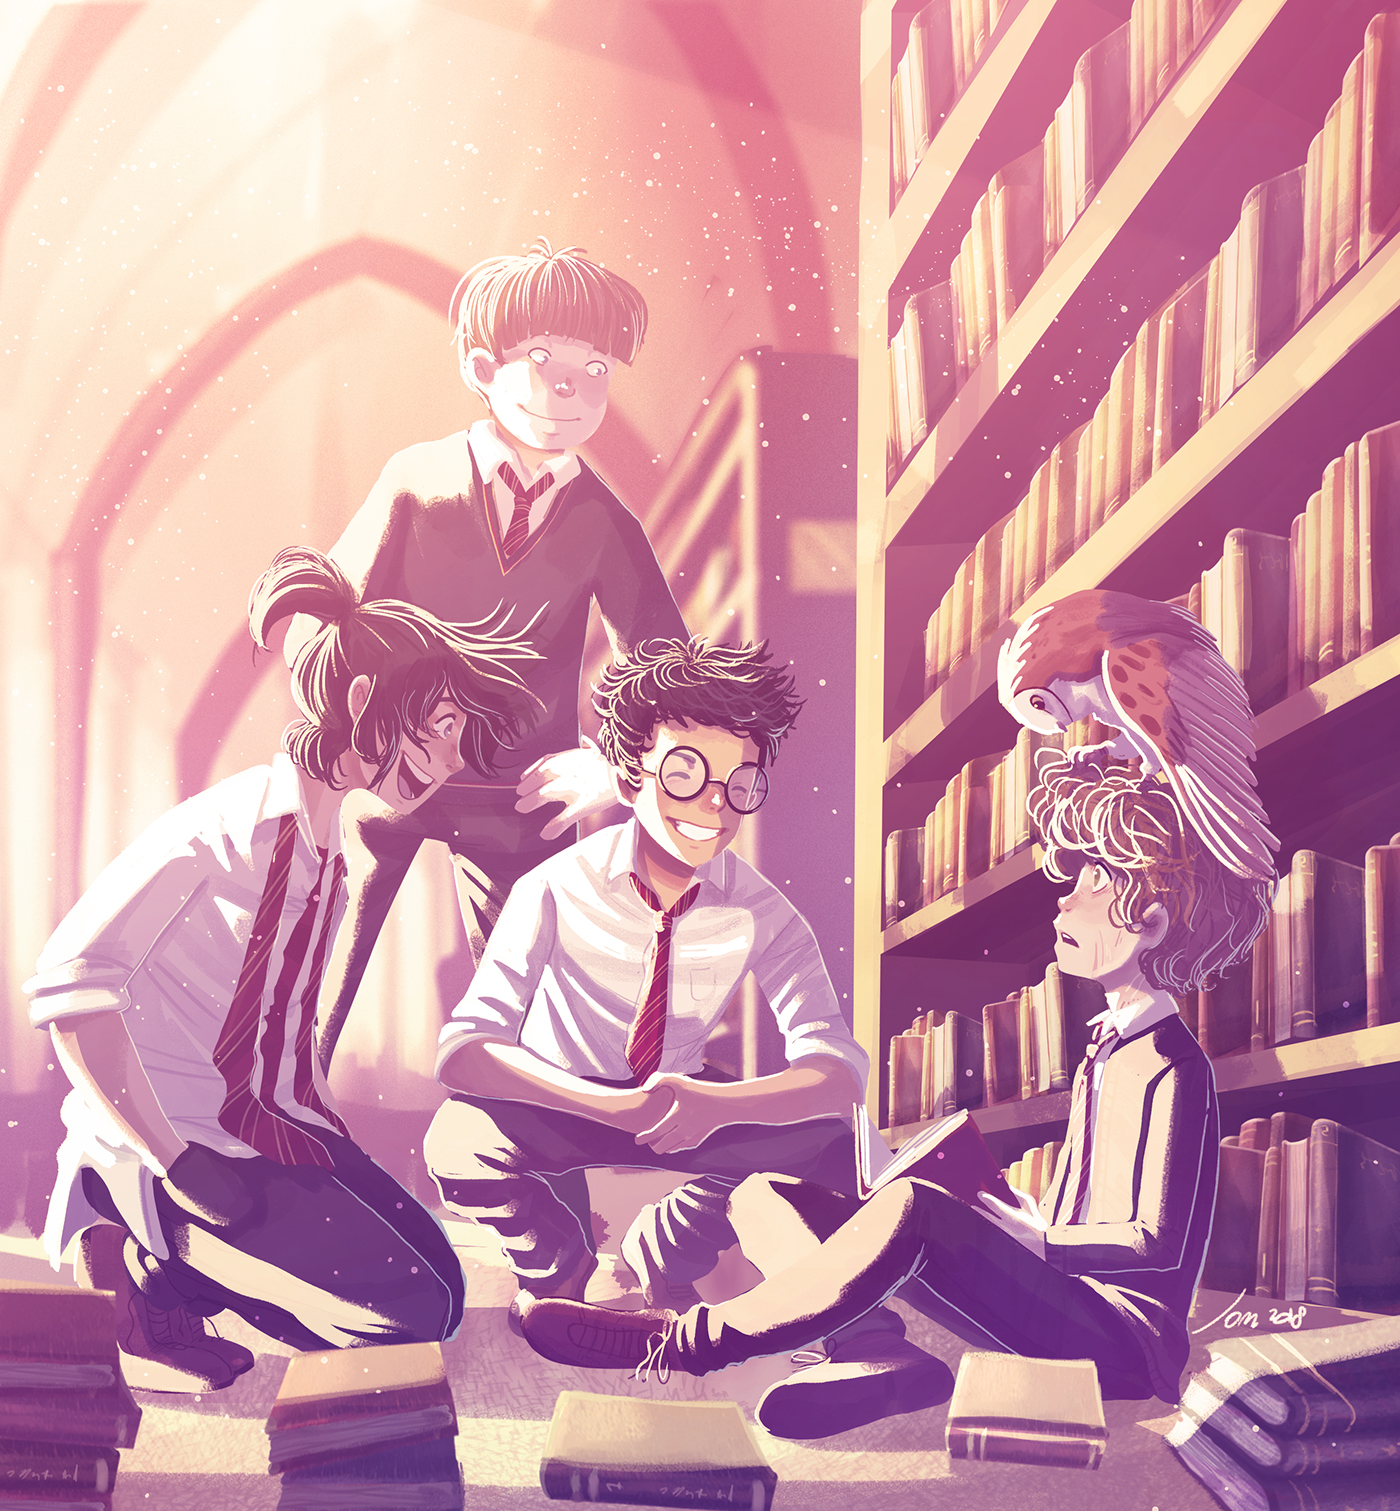 A Marauders Fanart From The Harry Potter Book Series. 